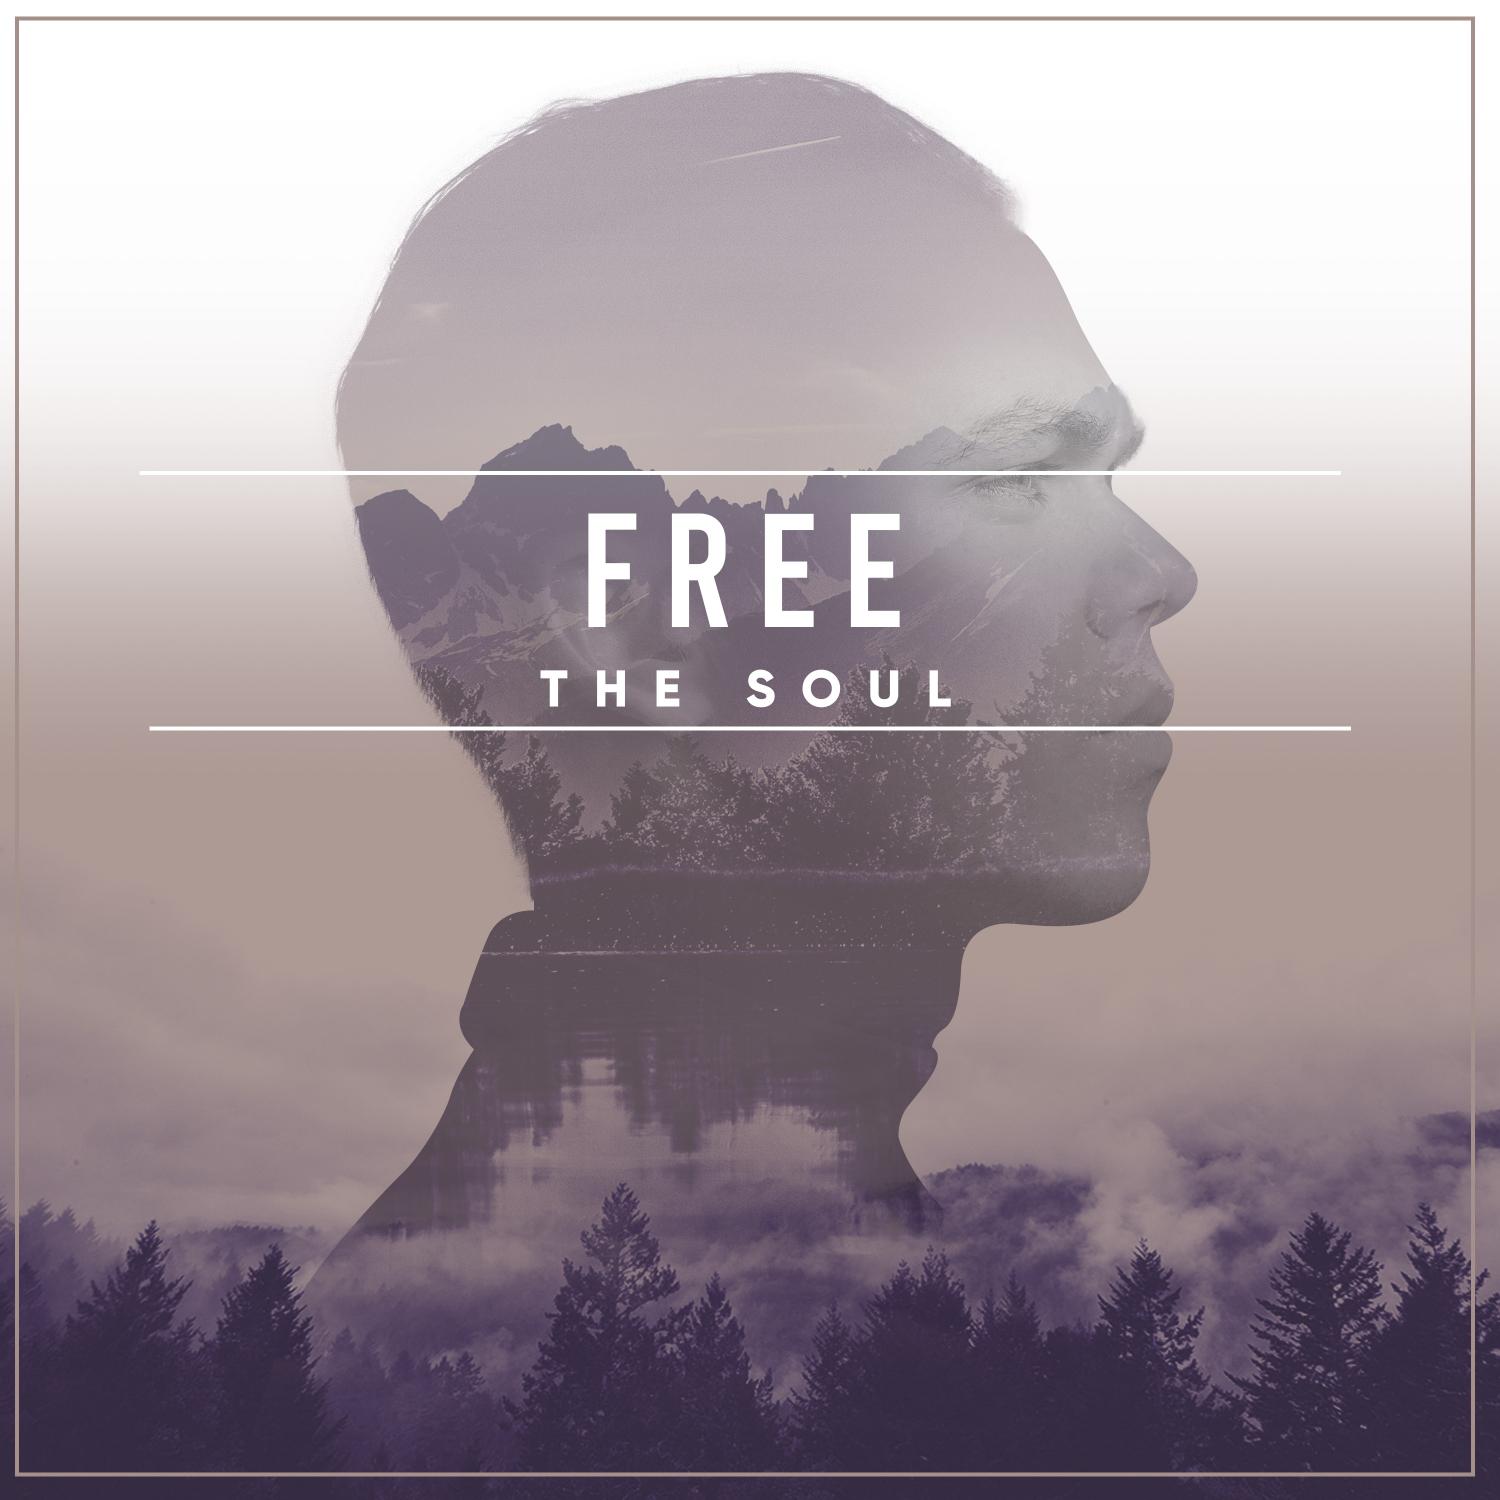 17 Asian Zen Tracks to Free the Soul